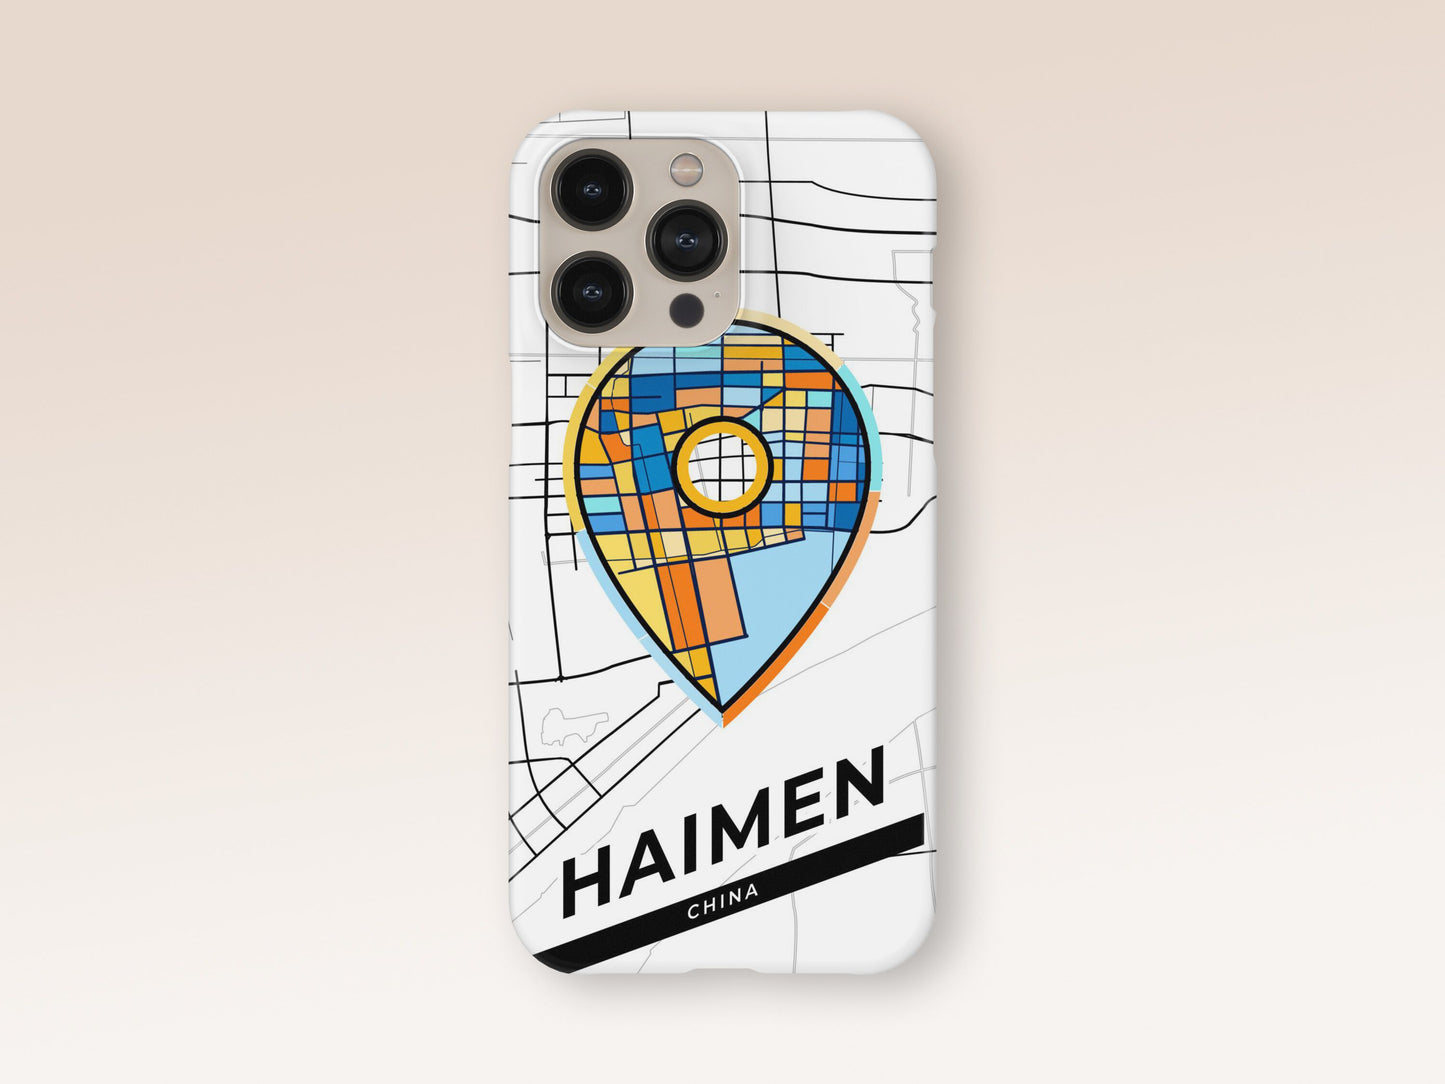 Haimen China slim phone case with colorful icon. Birthday, wedding or housewarming gift. Couple match cases. 1